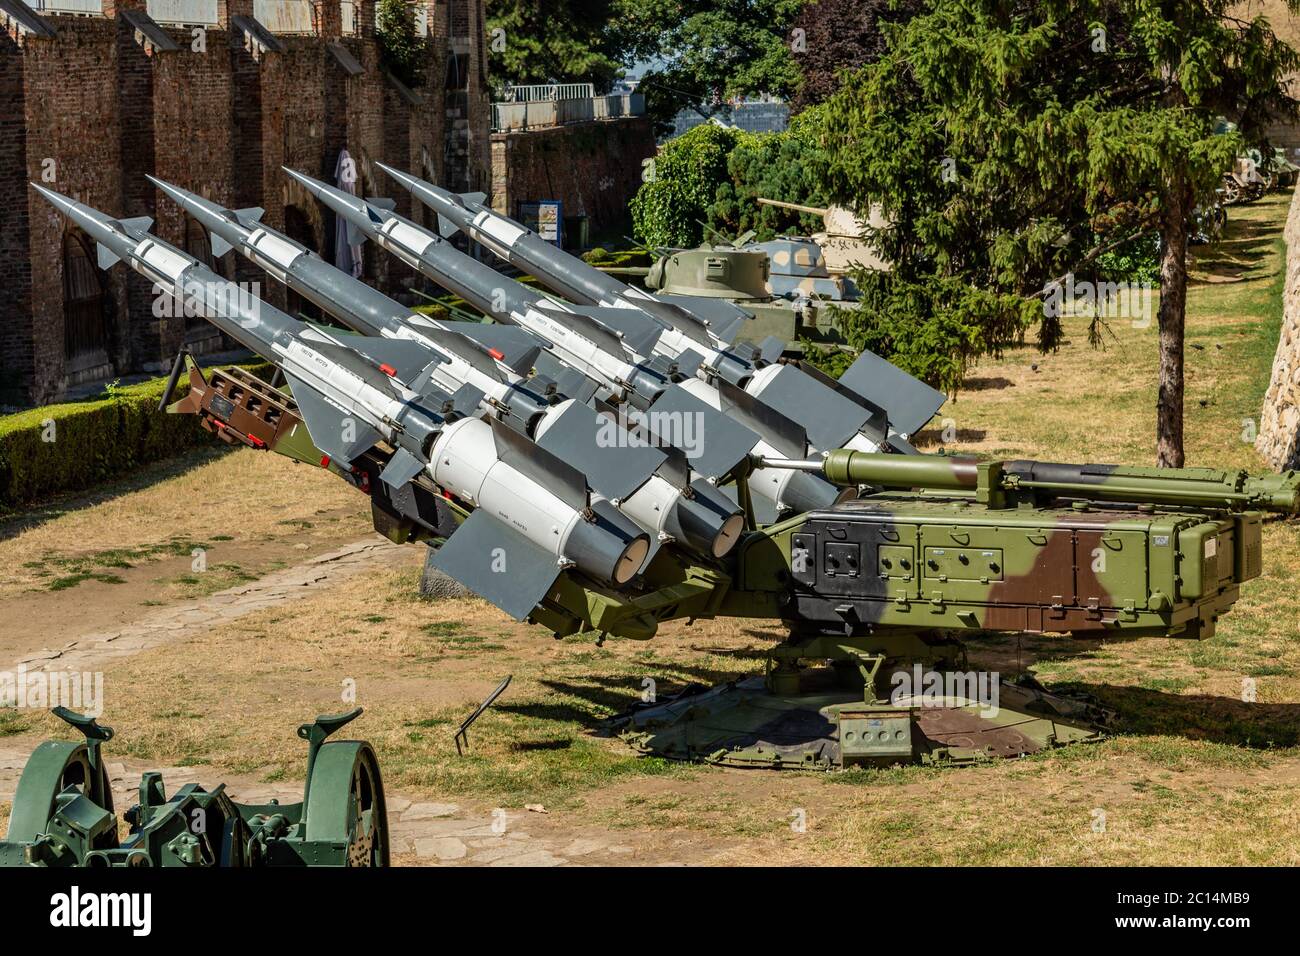 Belgrade / Serbia - July 30, 2017: Battery of Yugoslav version of the Soviet S-125 Neva missile system that shot down F-117A during NATO bombing of Yu Stock Photo